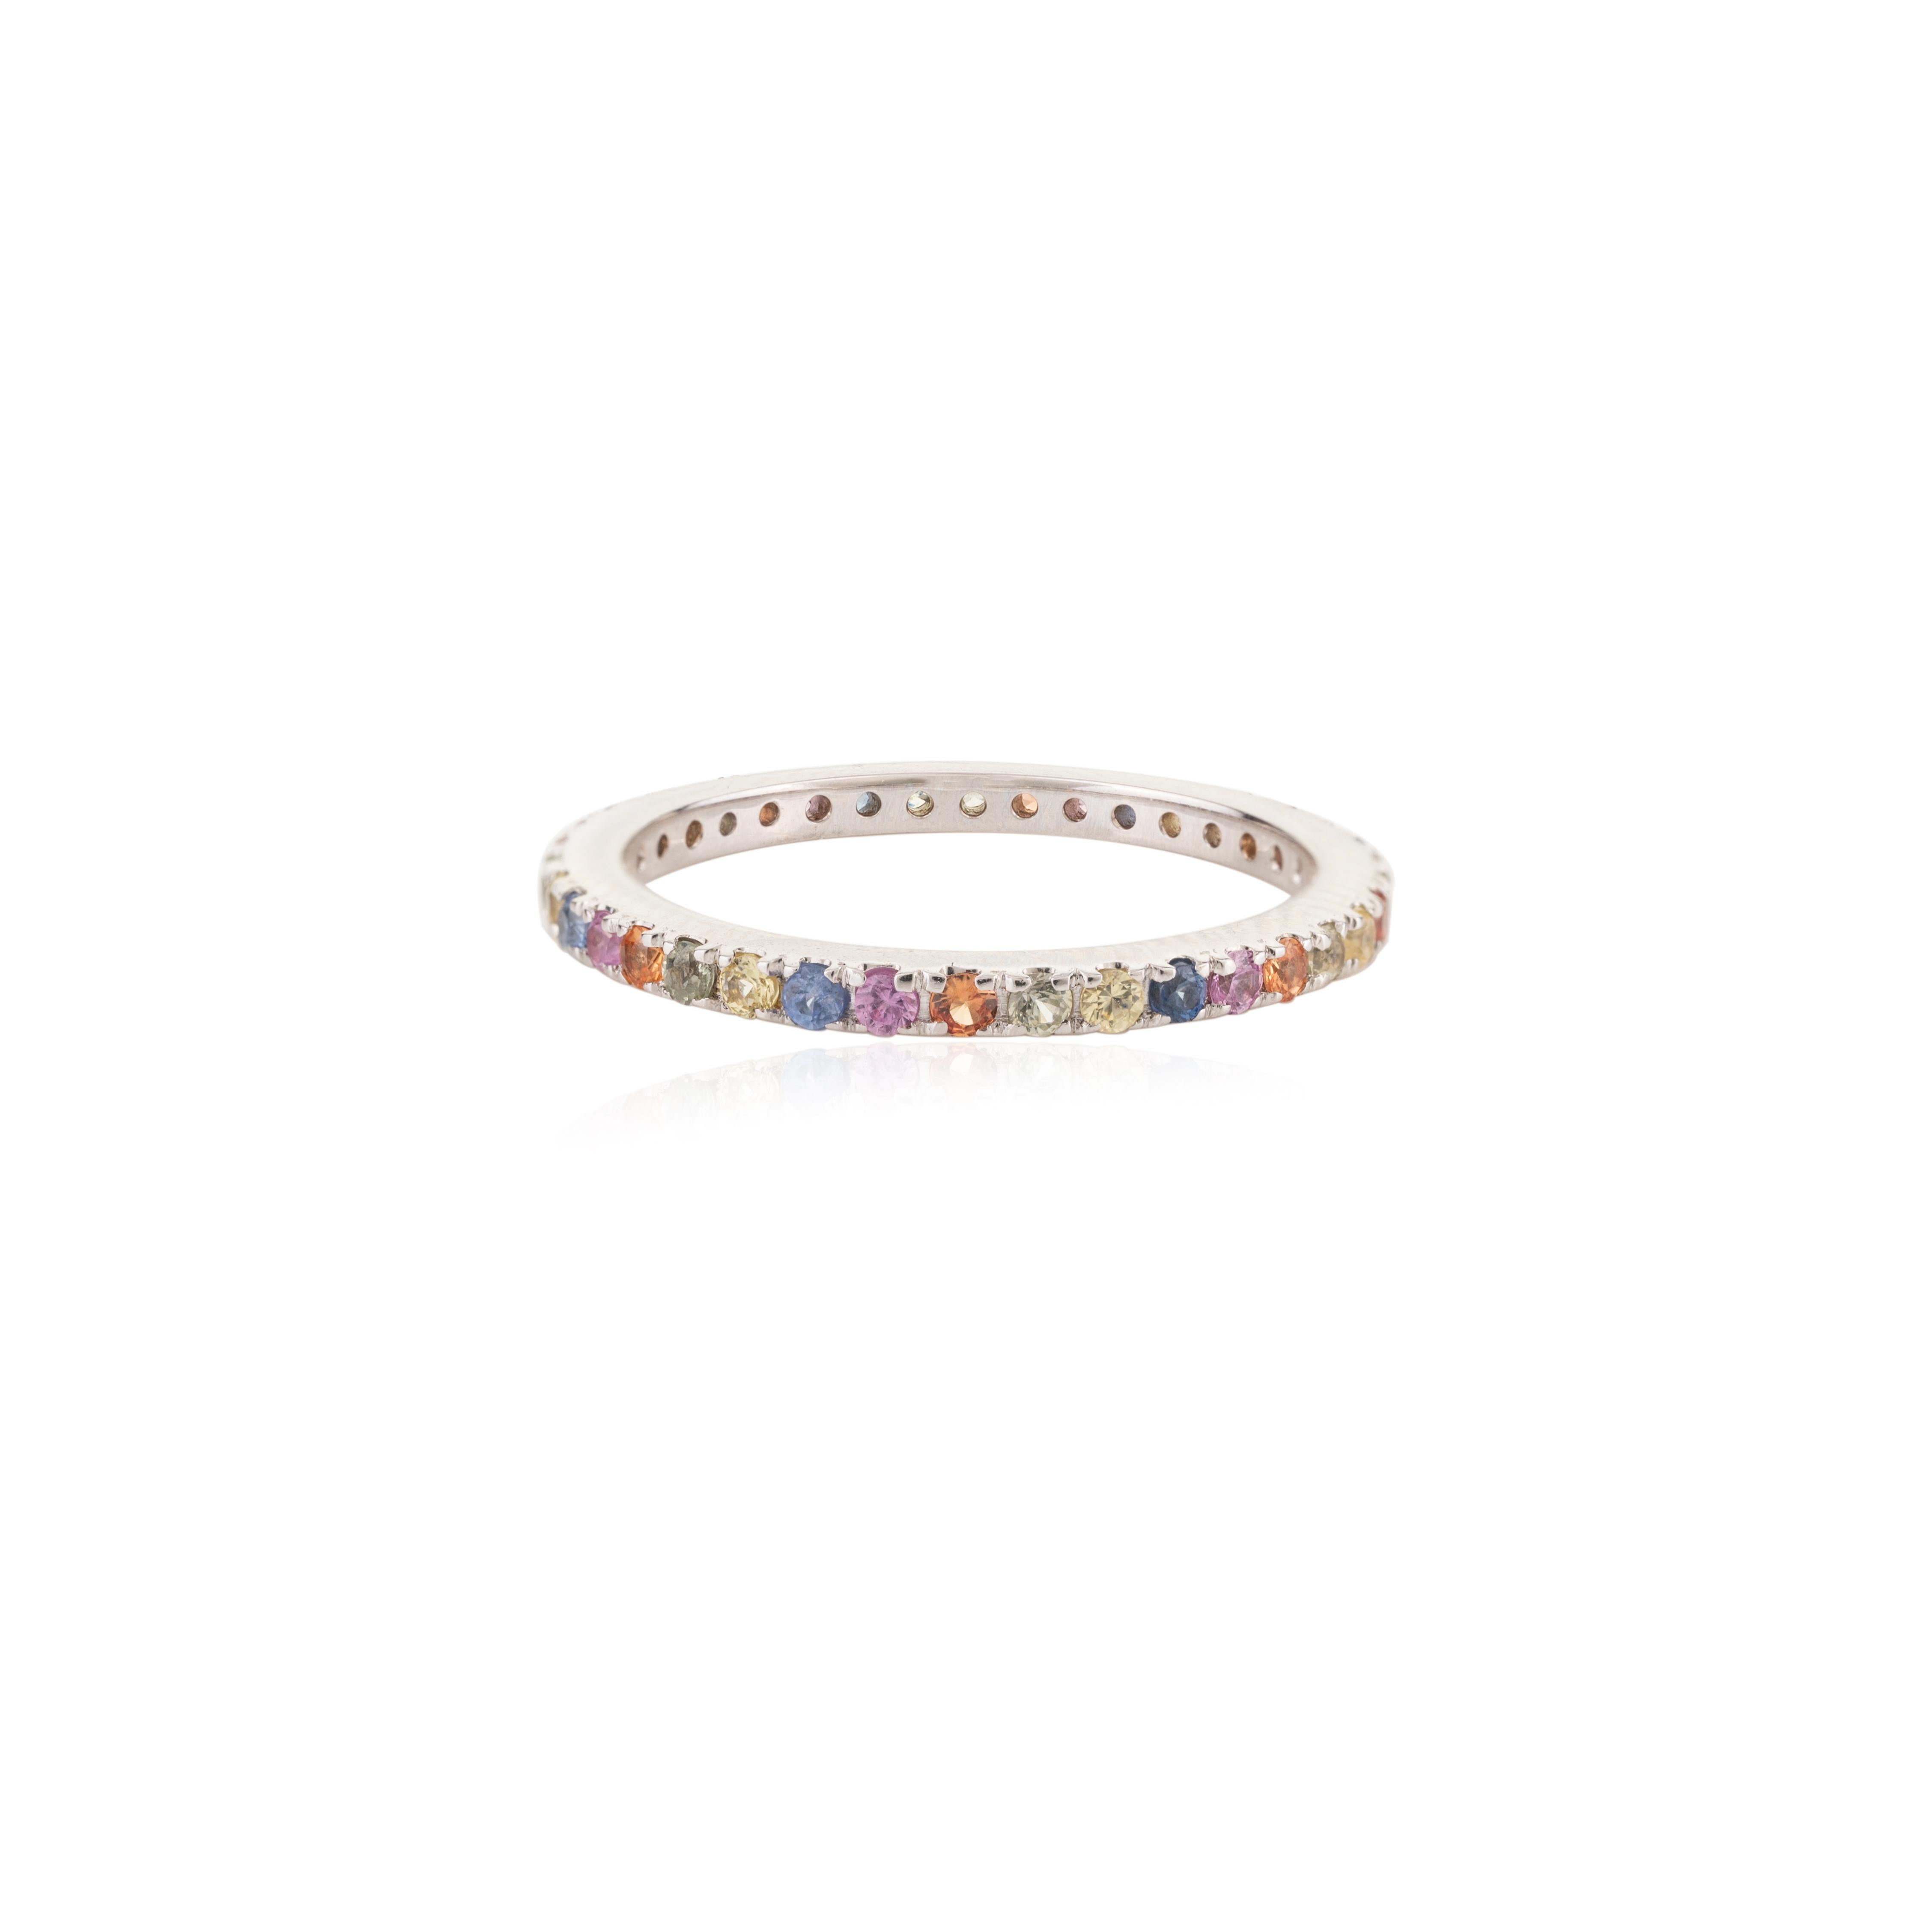 For Sale:  14 Karat White Gold Multi Sapphire Stackable Eternity Band Ring Gift for Her 3